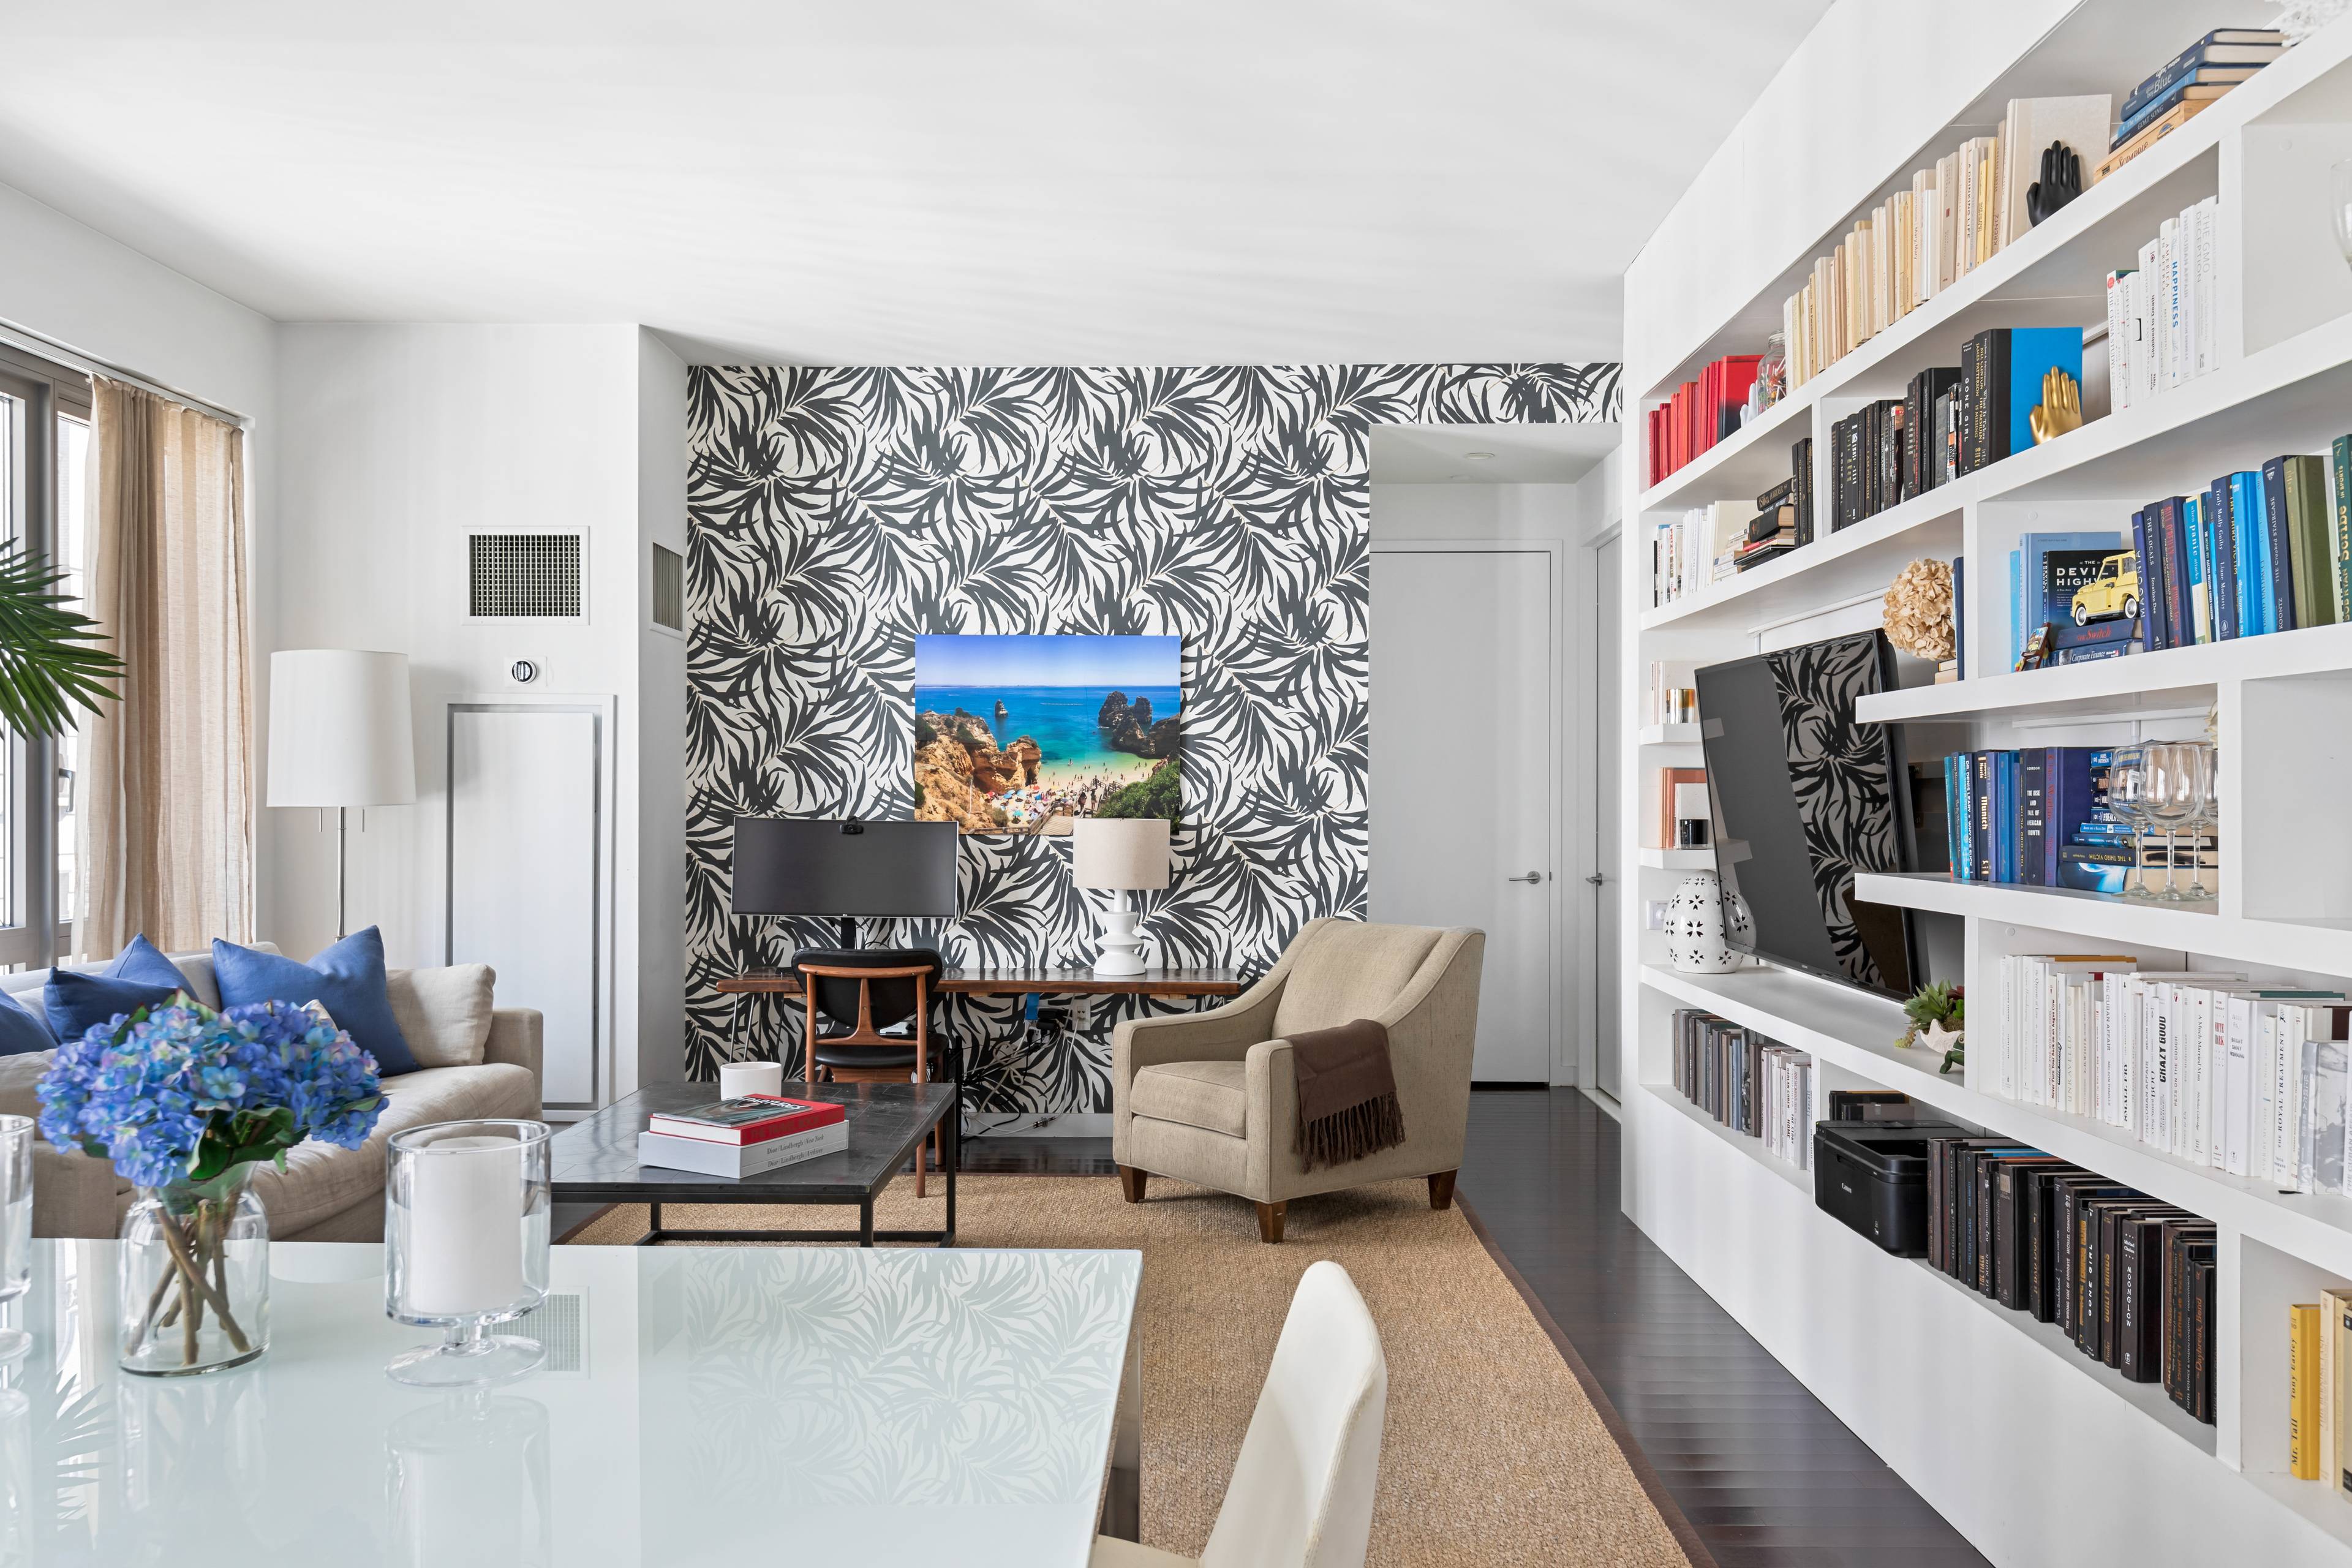 Welcome to 10C at 4W21, a sleek, spacious 1 bedroom convertible 2 2 bathroom apartment in the heart of the Flatiron District.